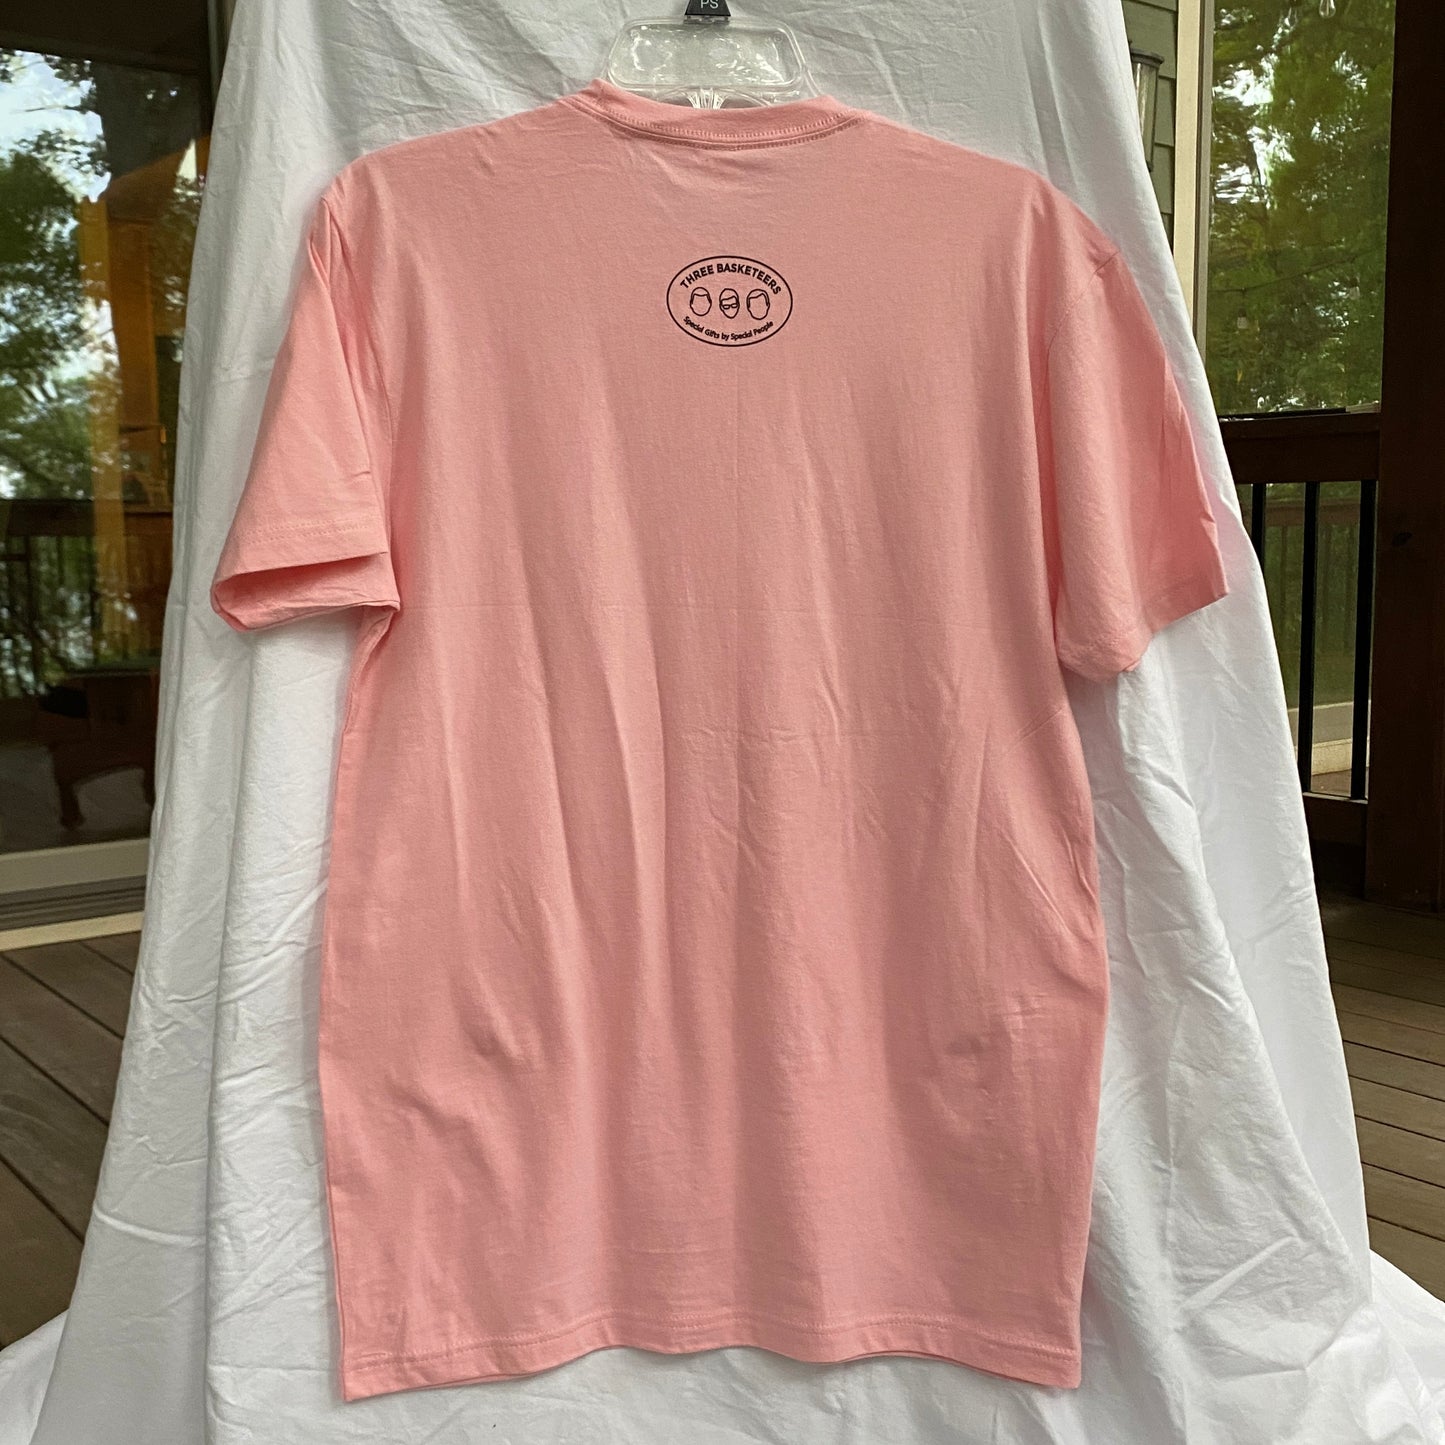 Light Pink t-shirt hanging up with the Three Basketeers logo on back